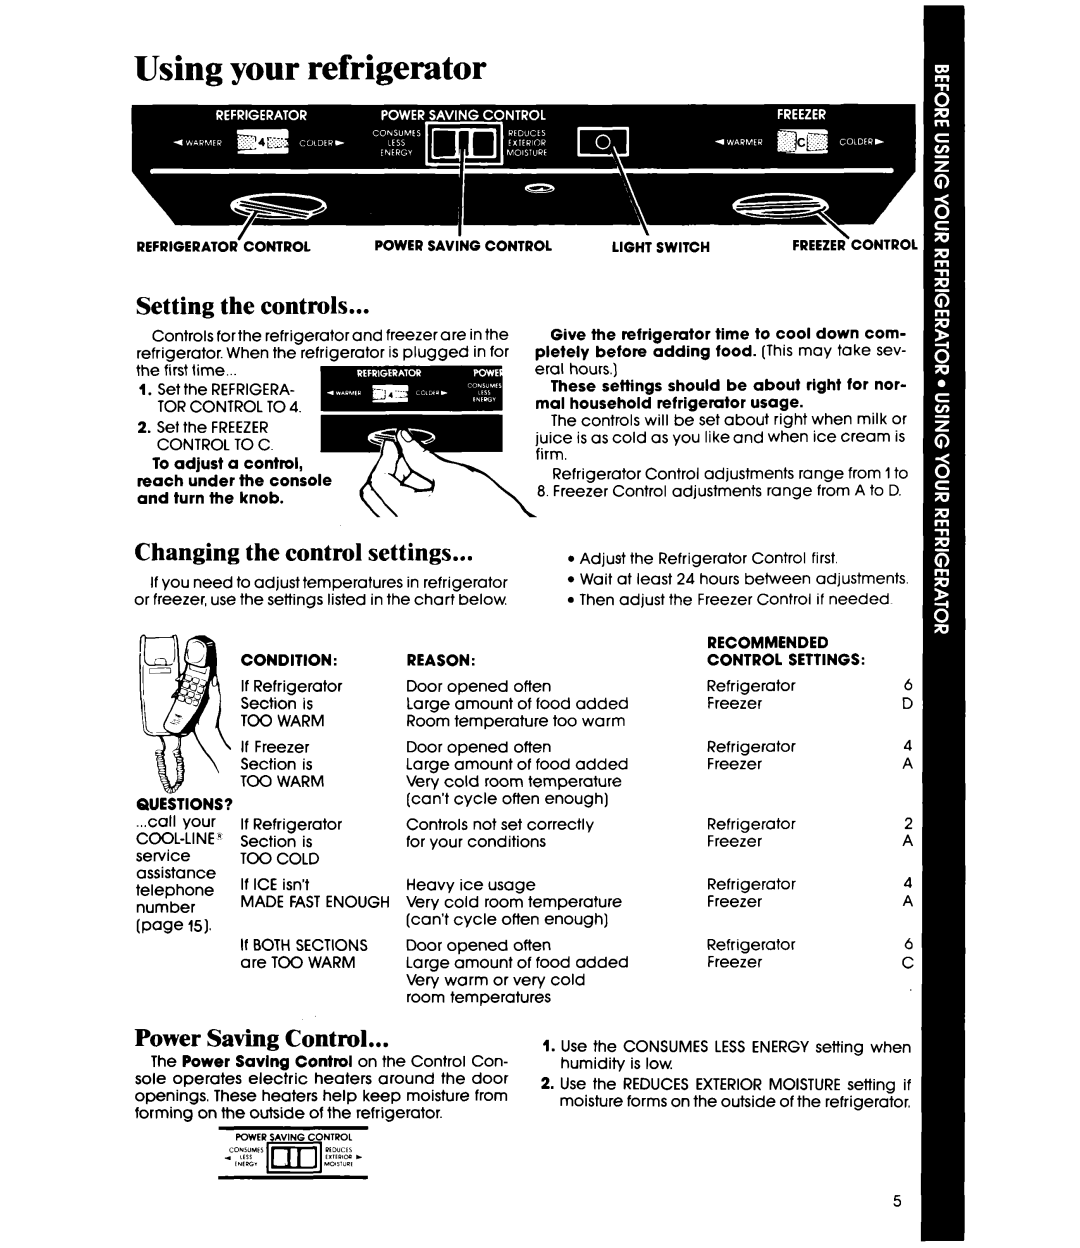 Whirlpool ETl8AK manual Using your refrigerator, the controls, settings, Power Saving Control, page, Setting, Changing 